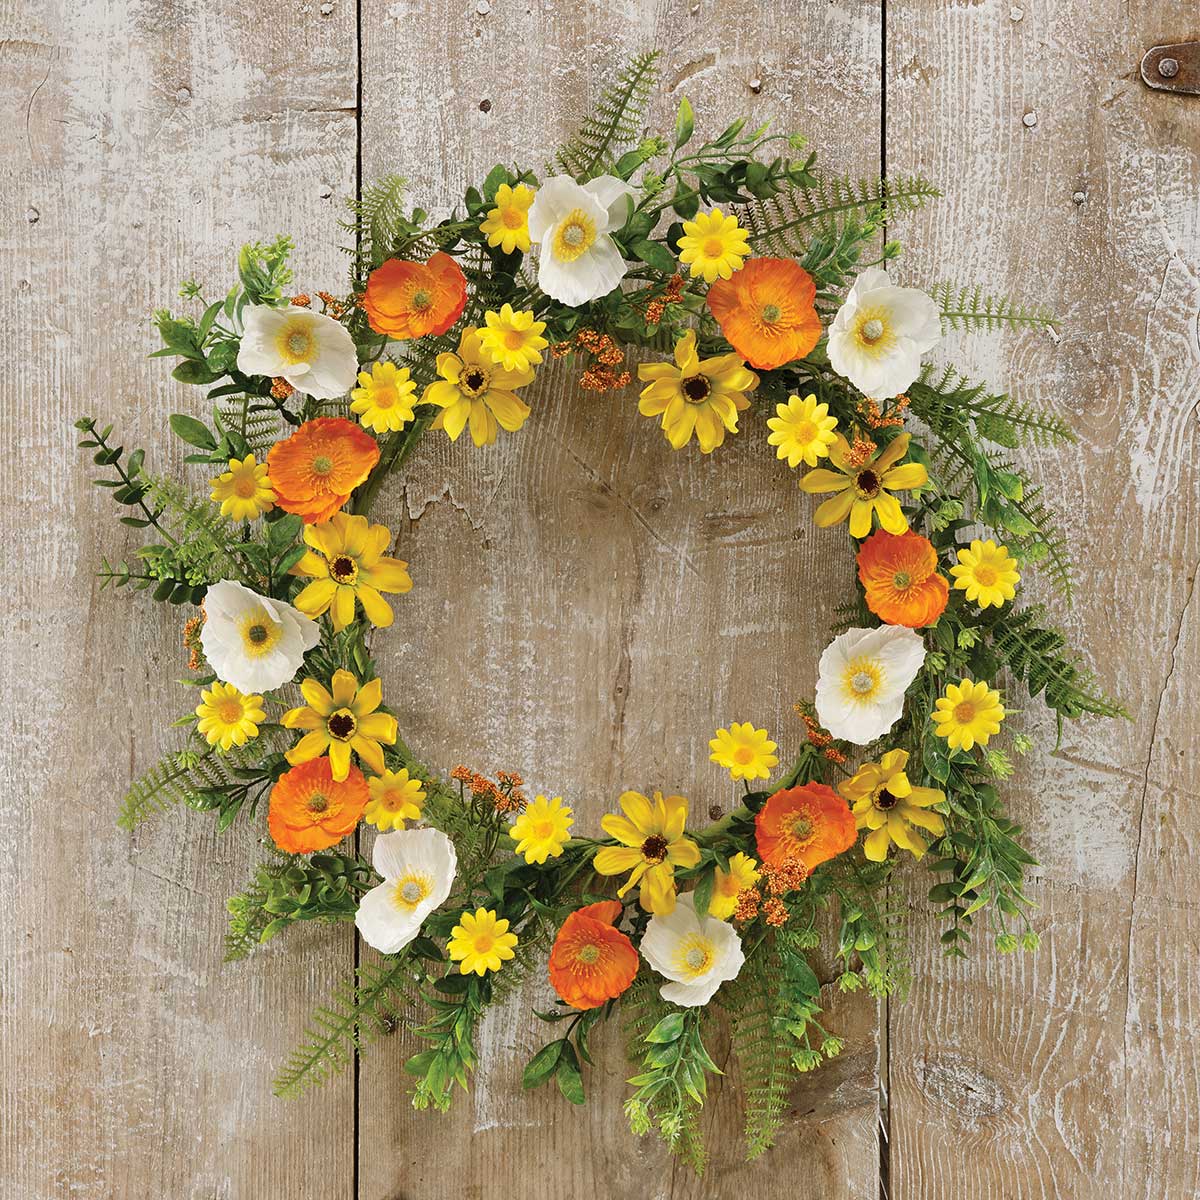 WREATH POPPY/DAISY 22IN (INNER RING 11IN) POLYESTER/PLASTIC - Click Image to Close